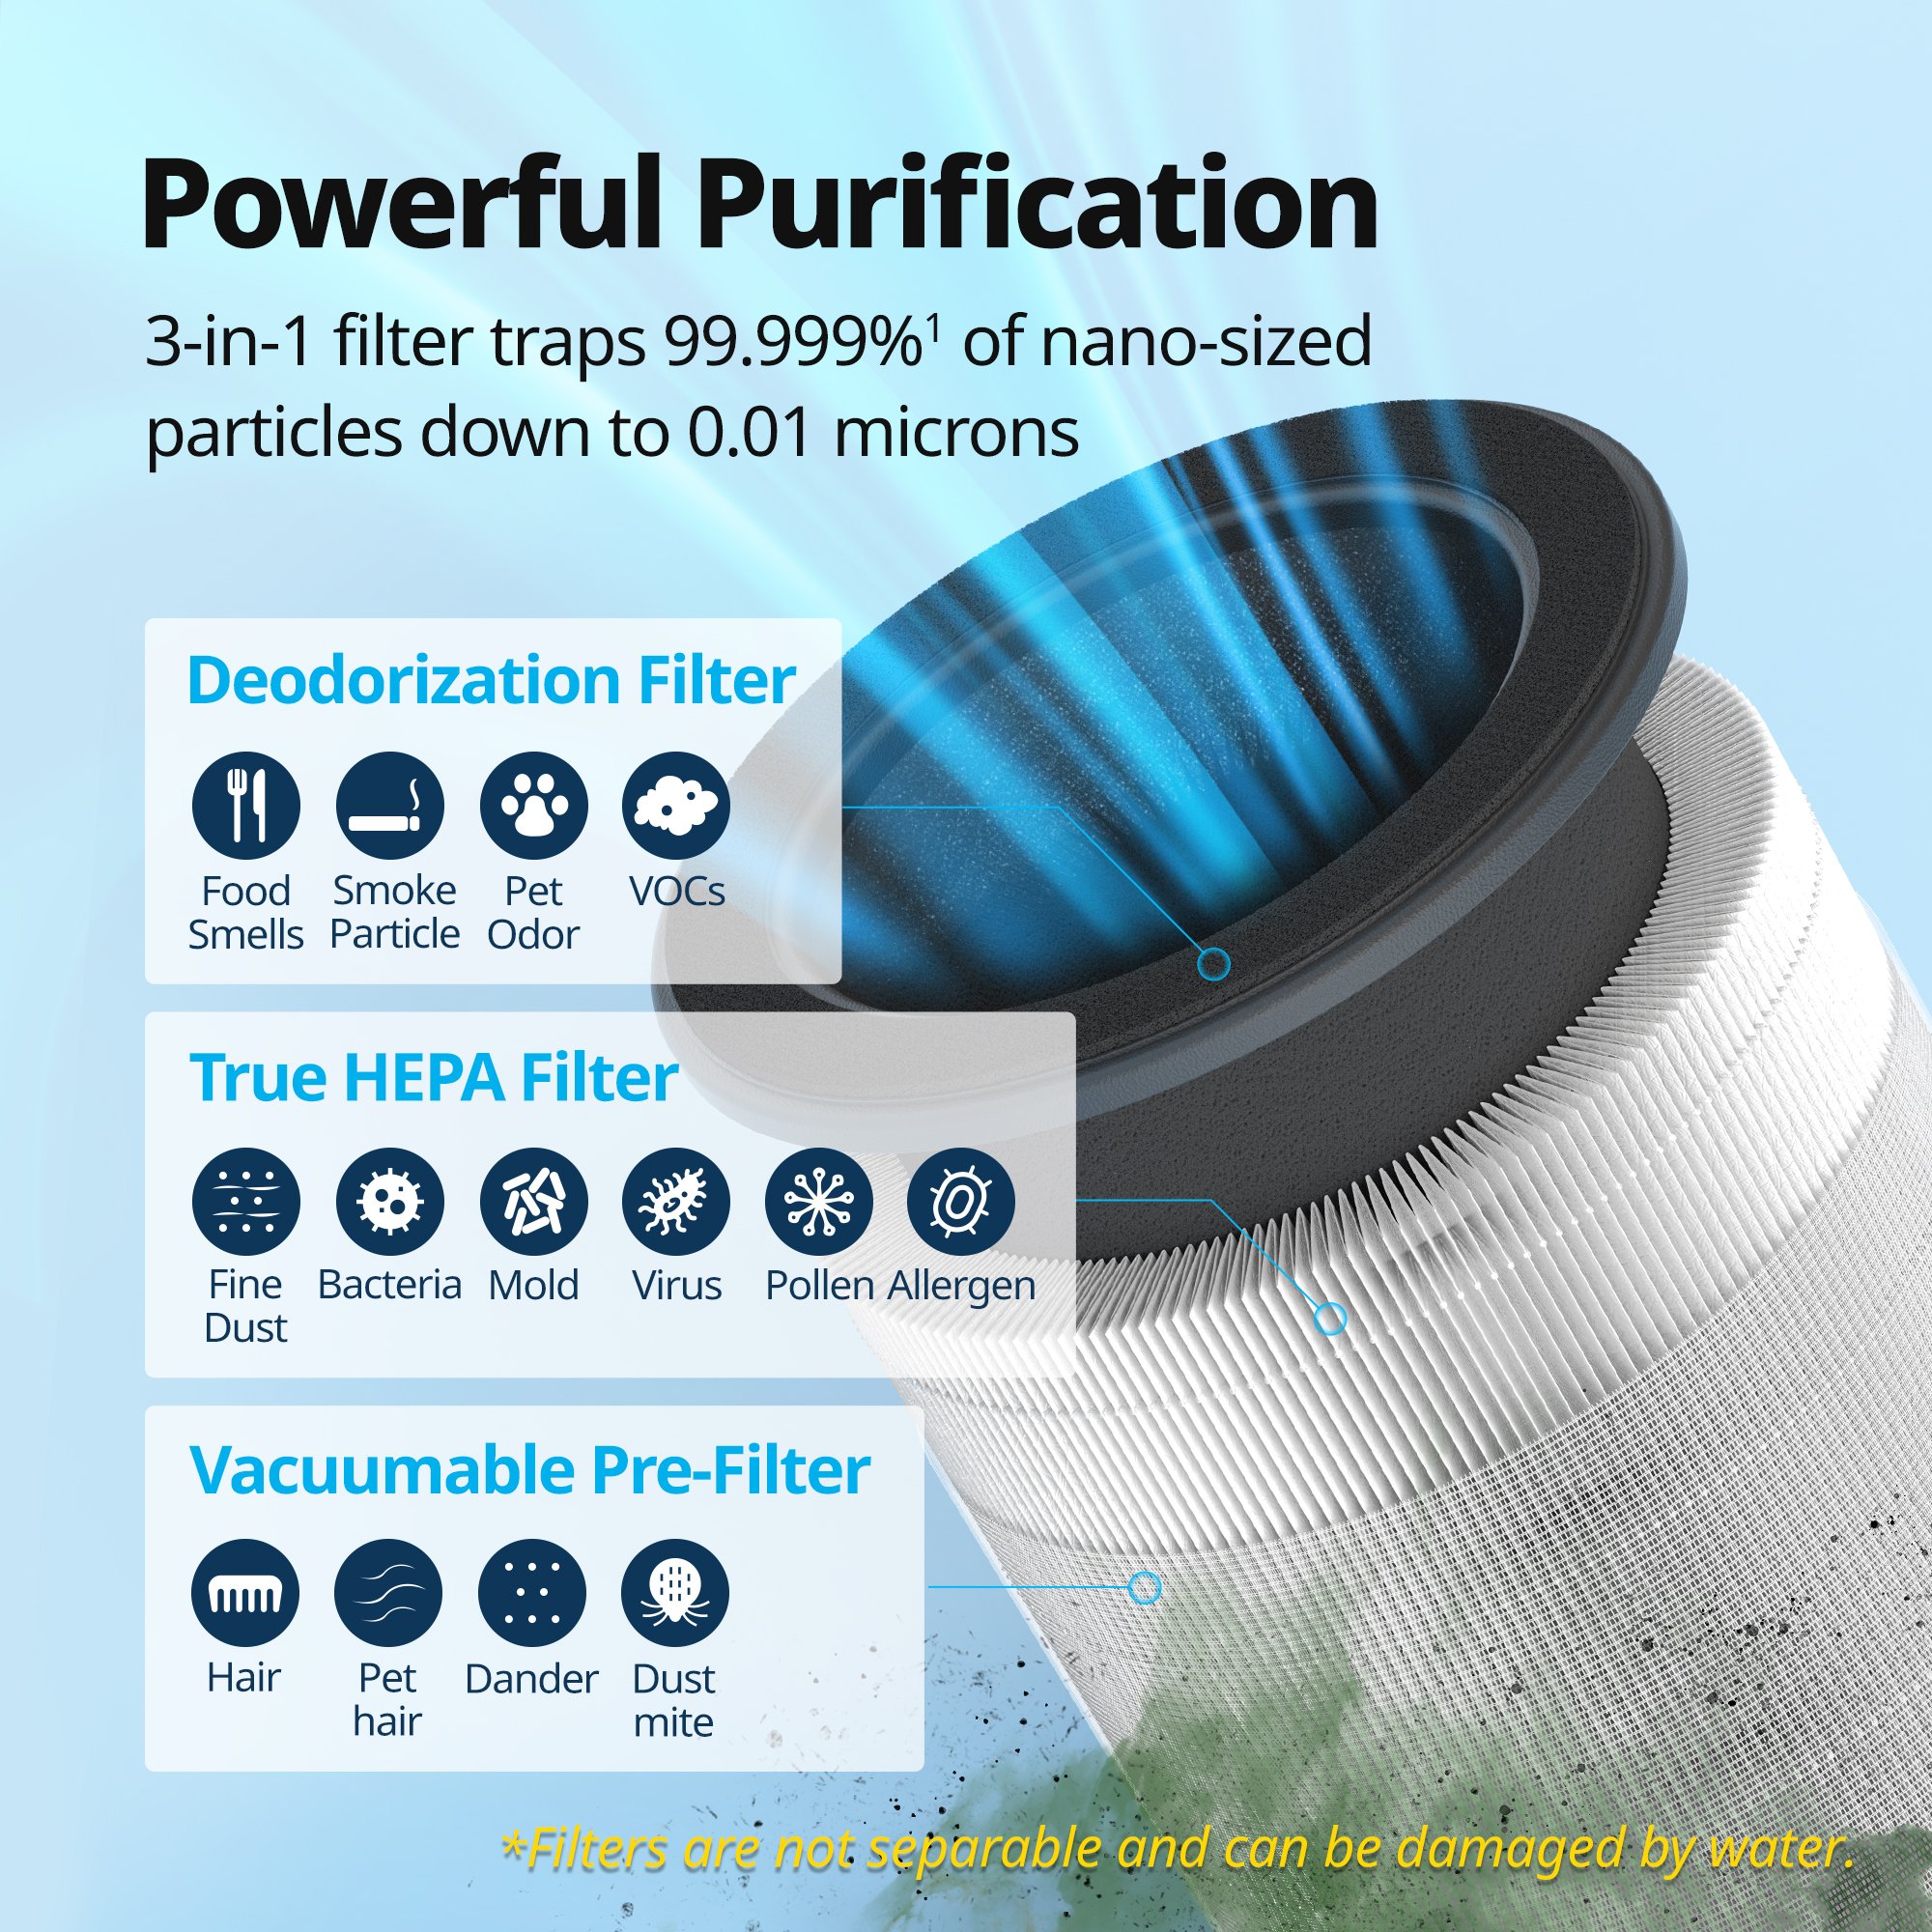 Powerful Purification: 3-in-1 filter traps 99.999% of nano-sized particles down to 0.01 microns.